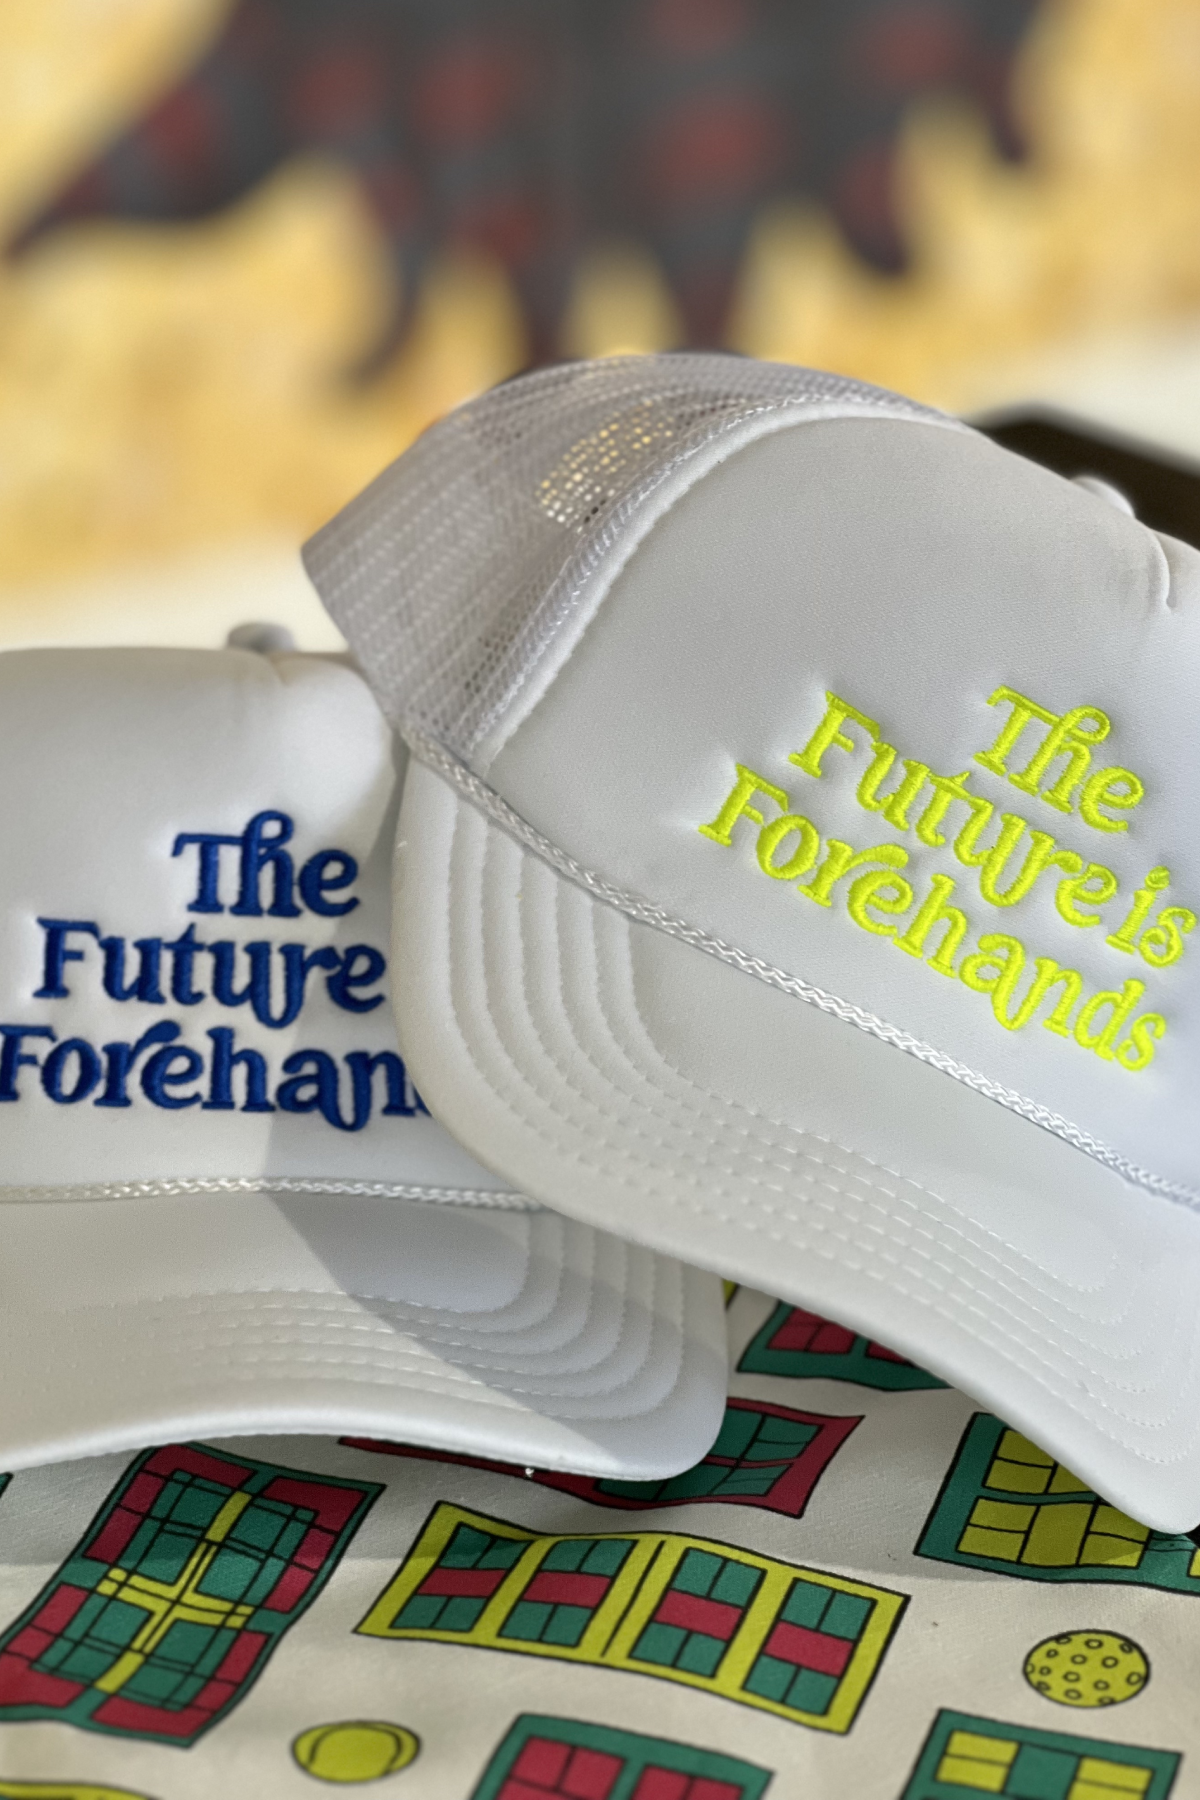 The Future is Forehands, Mid-Profile, Trucker Hat in Neon